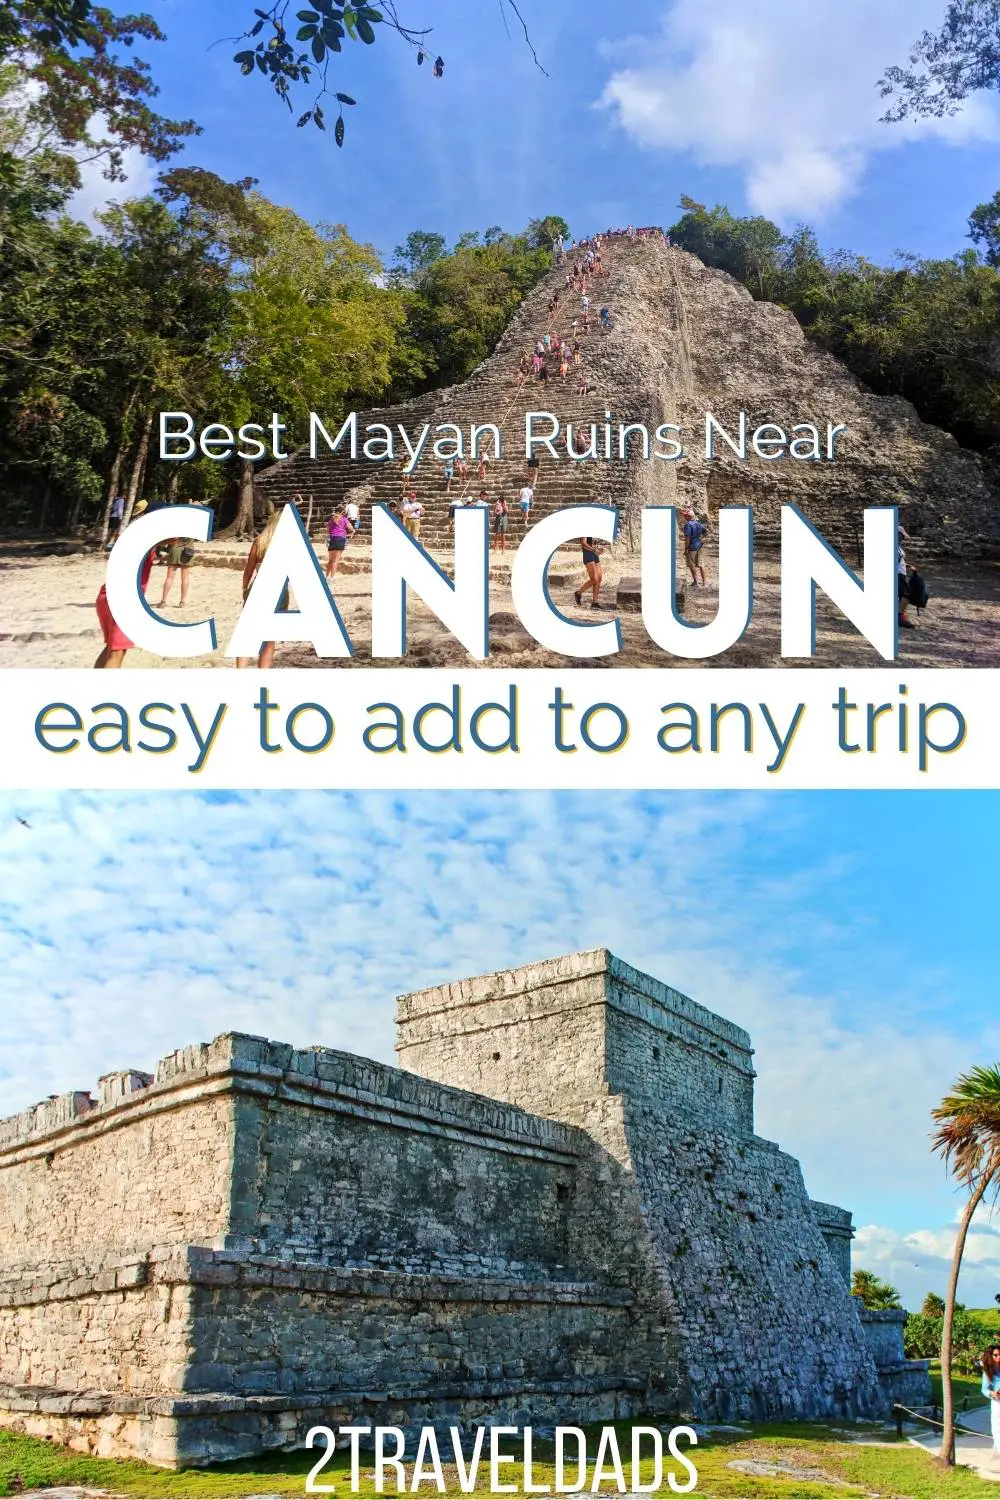 Add the best Mayan ruins near Cancun to a Yucatan vacation itinerary. From Cancun to Tulum, Mayan ruins are everywhere and are some of the most interesting things to do.